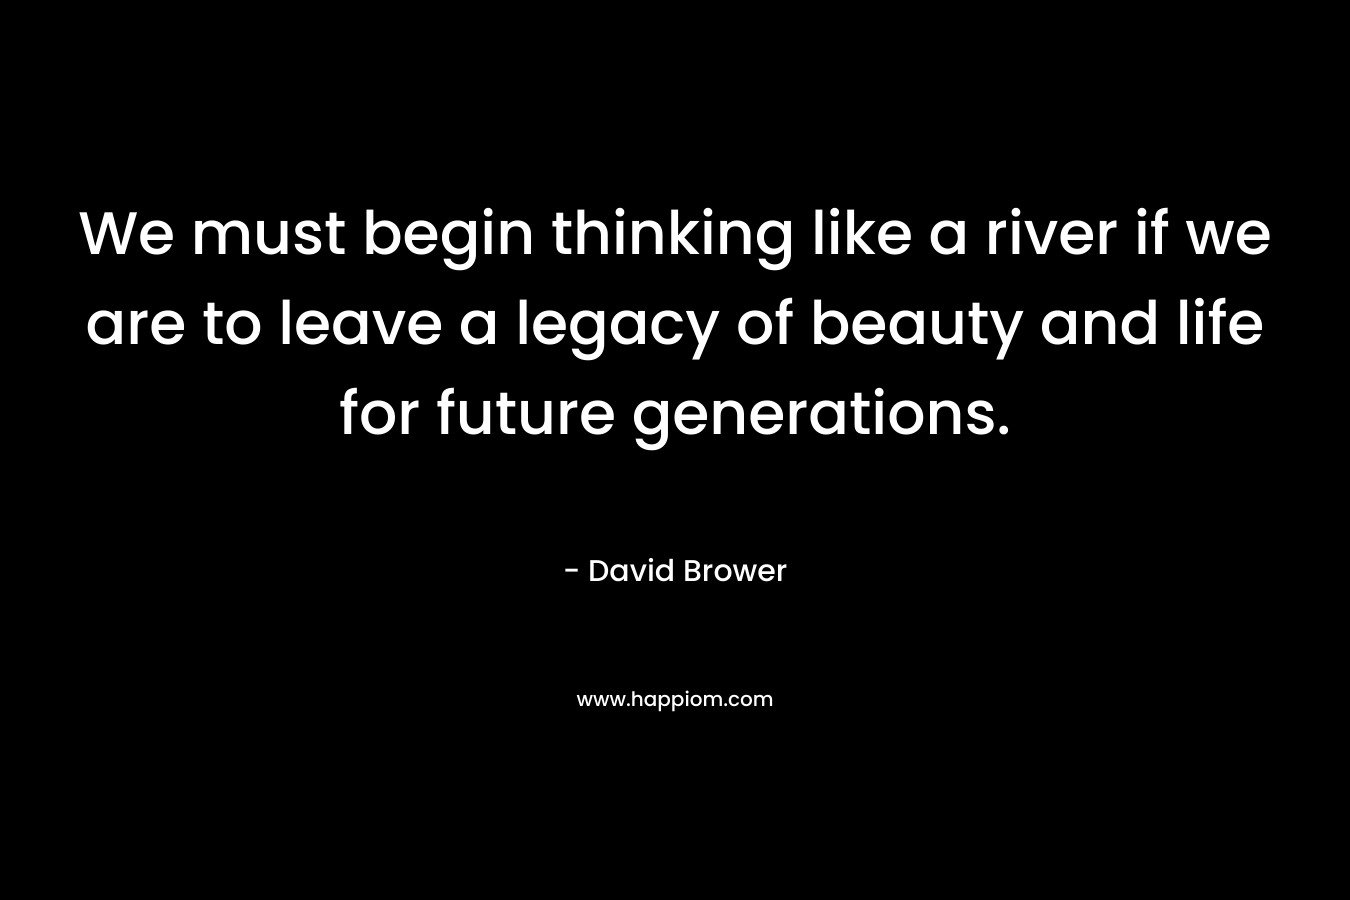 We must begin thinking like a river if we are to leave a legacy of beauty and life for future generations.